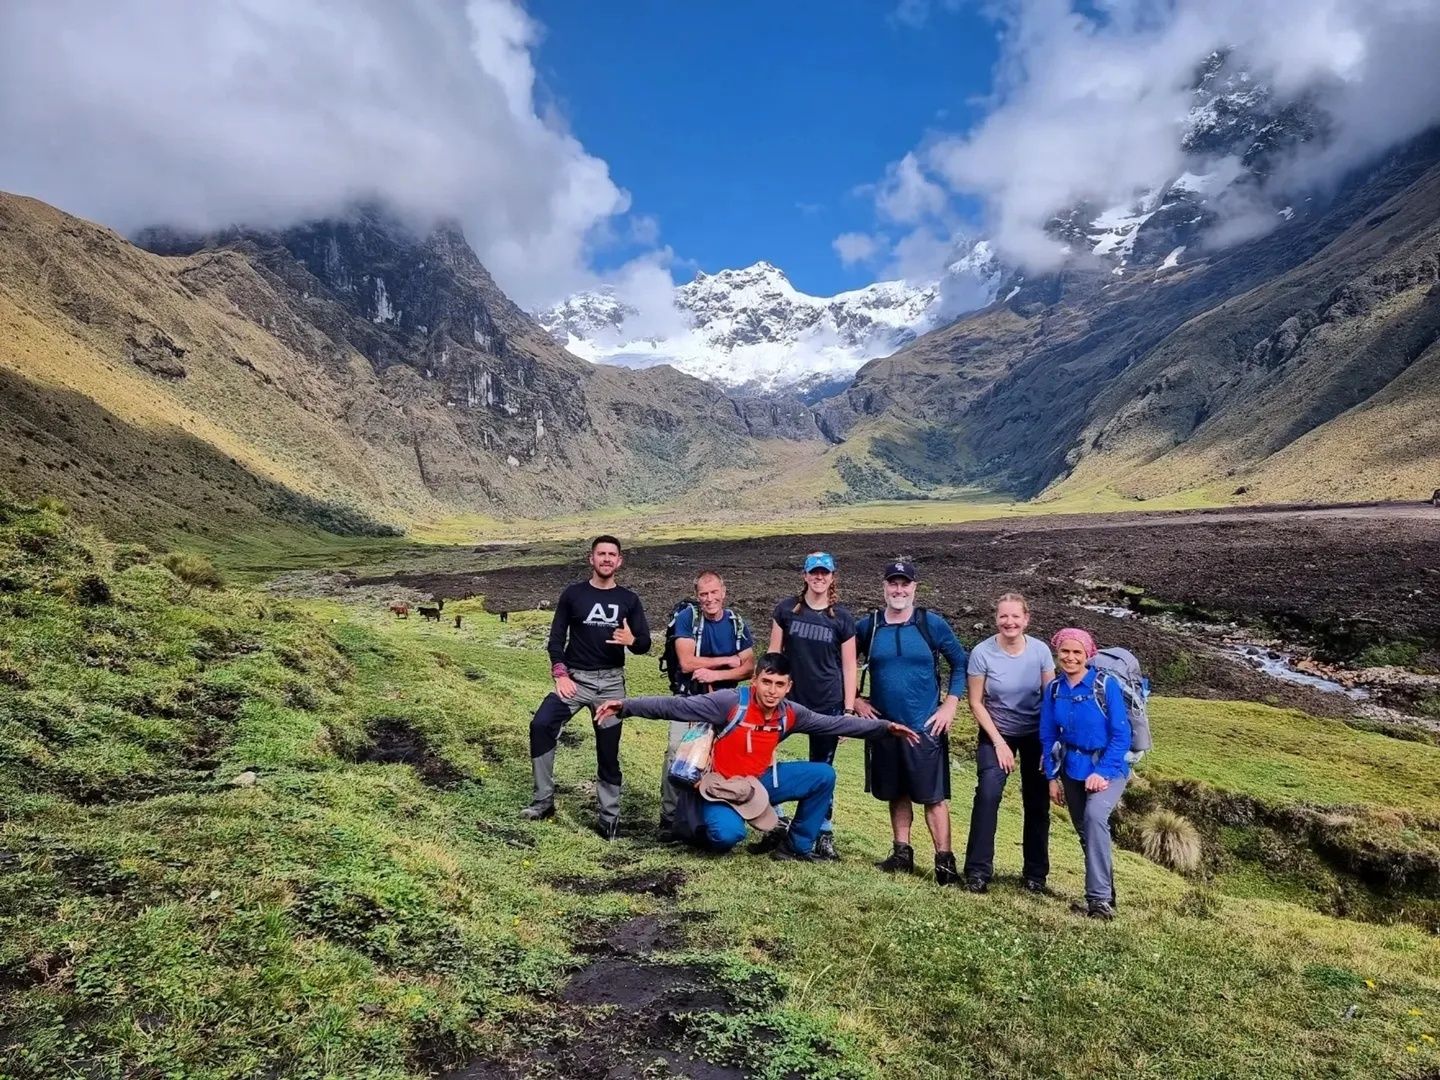 A group pose while hiking the Ecuadorian Andes. Photo: Adventure Journeys.